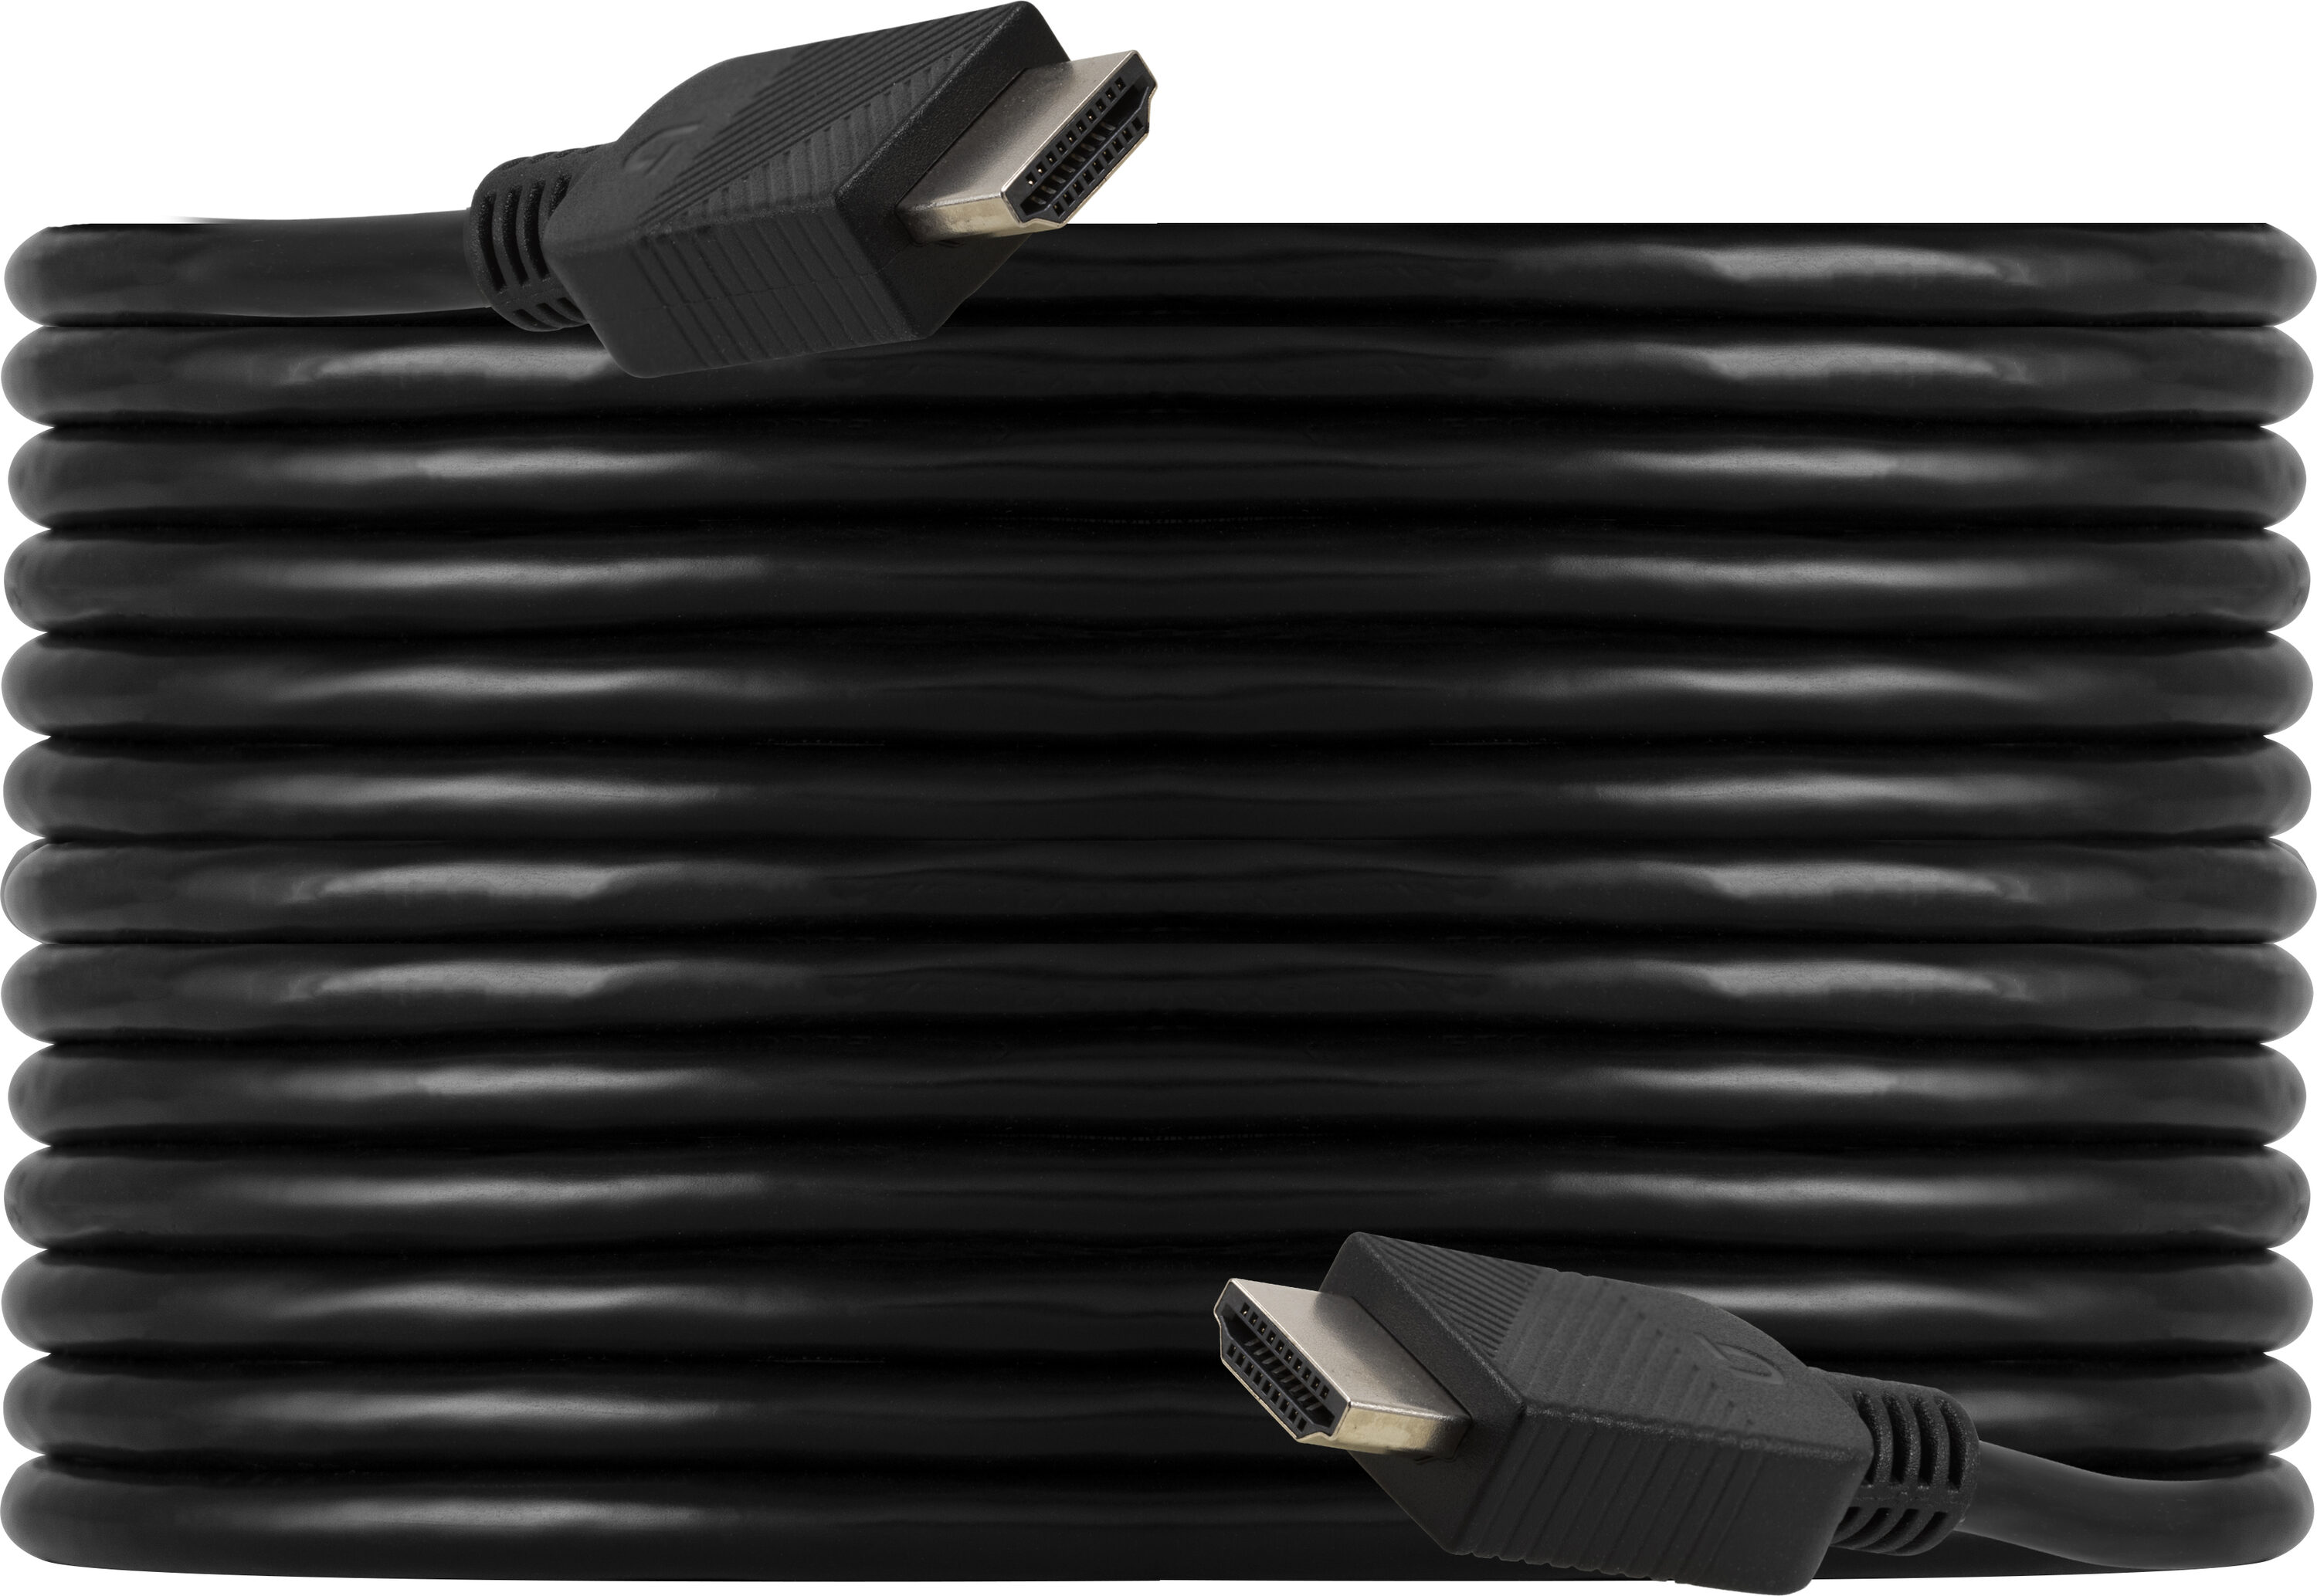 Cables - HDMI Cable, Home Theater Accessories, HDMI Products